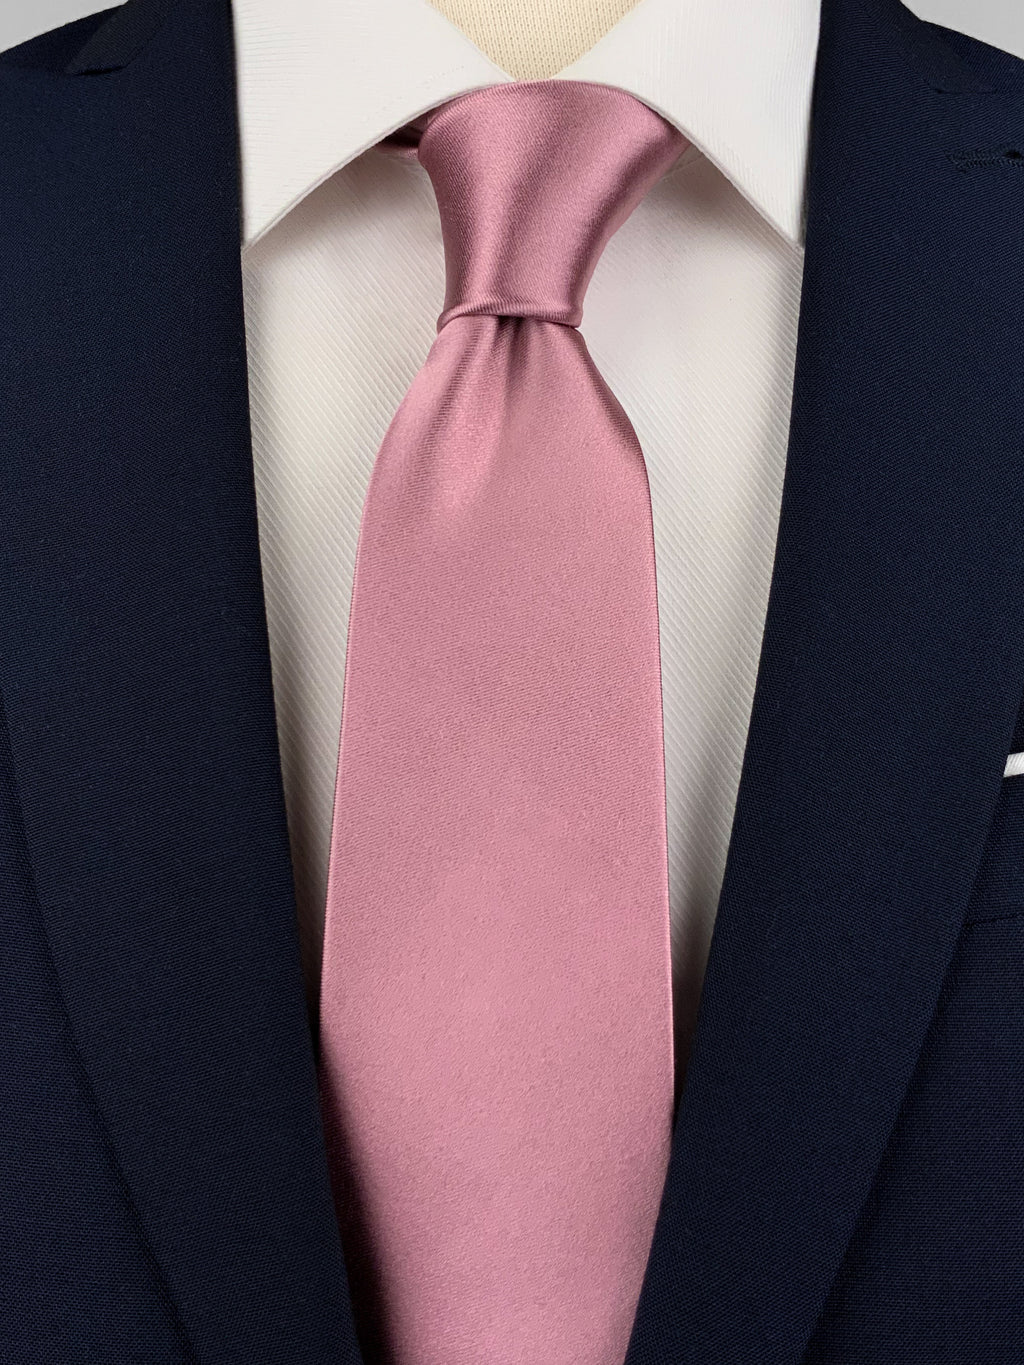 Tea pink mulberry silk satin tie worn with a white shirt and a navy blue suit